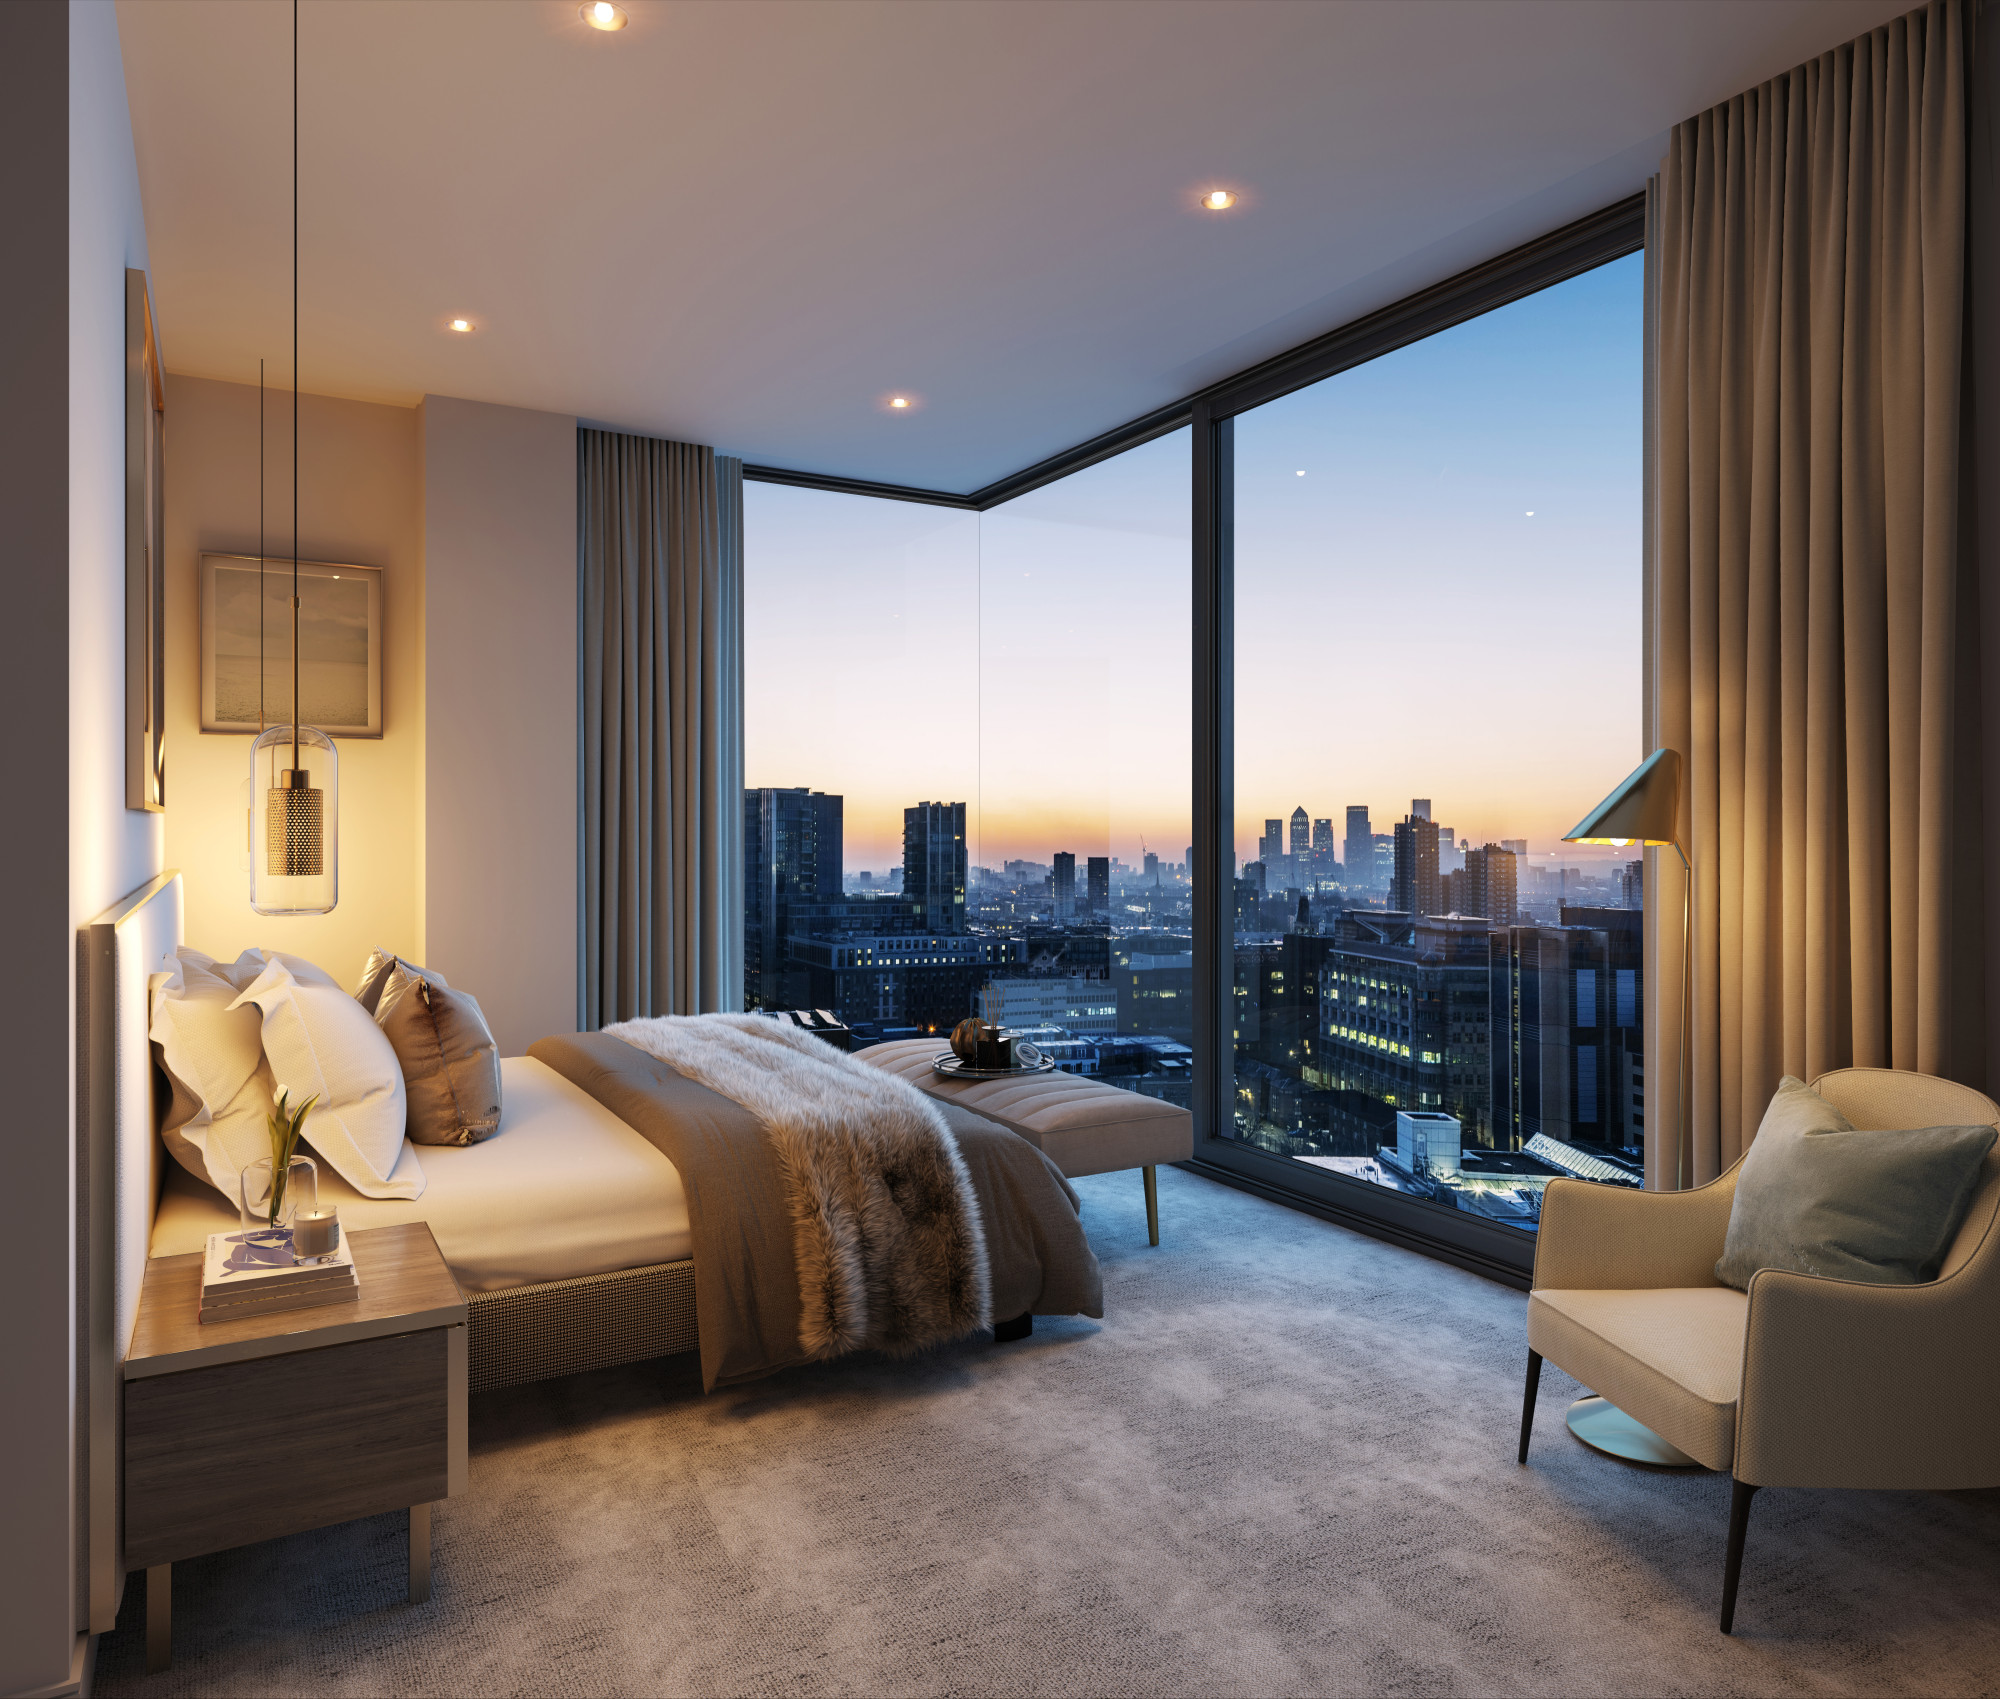 0 bed Residential Apartments Building For Sale in London, London - thumb 7